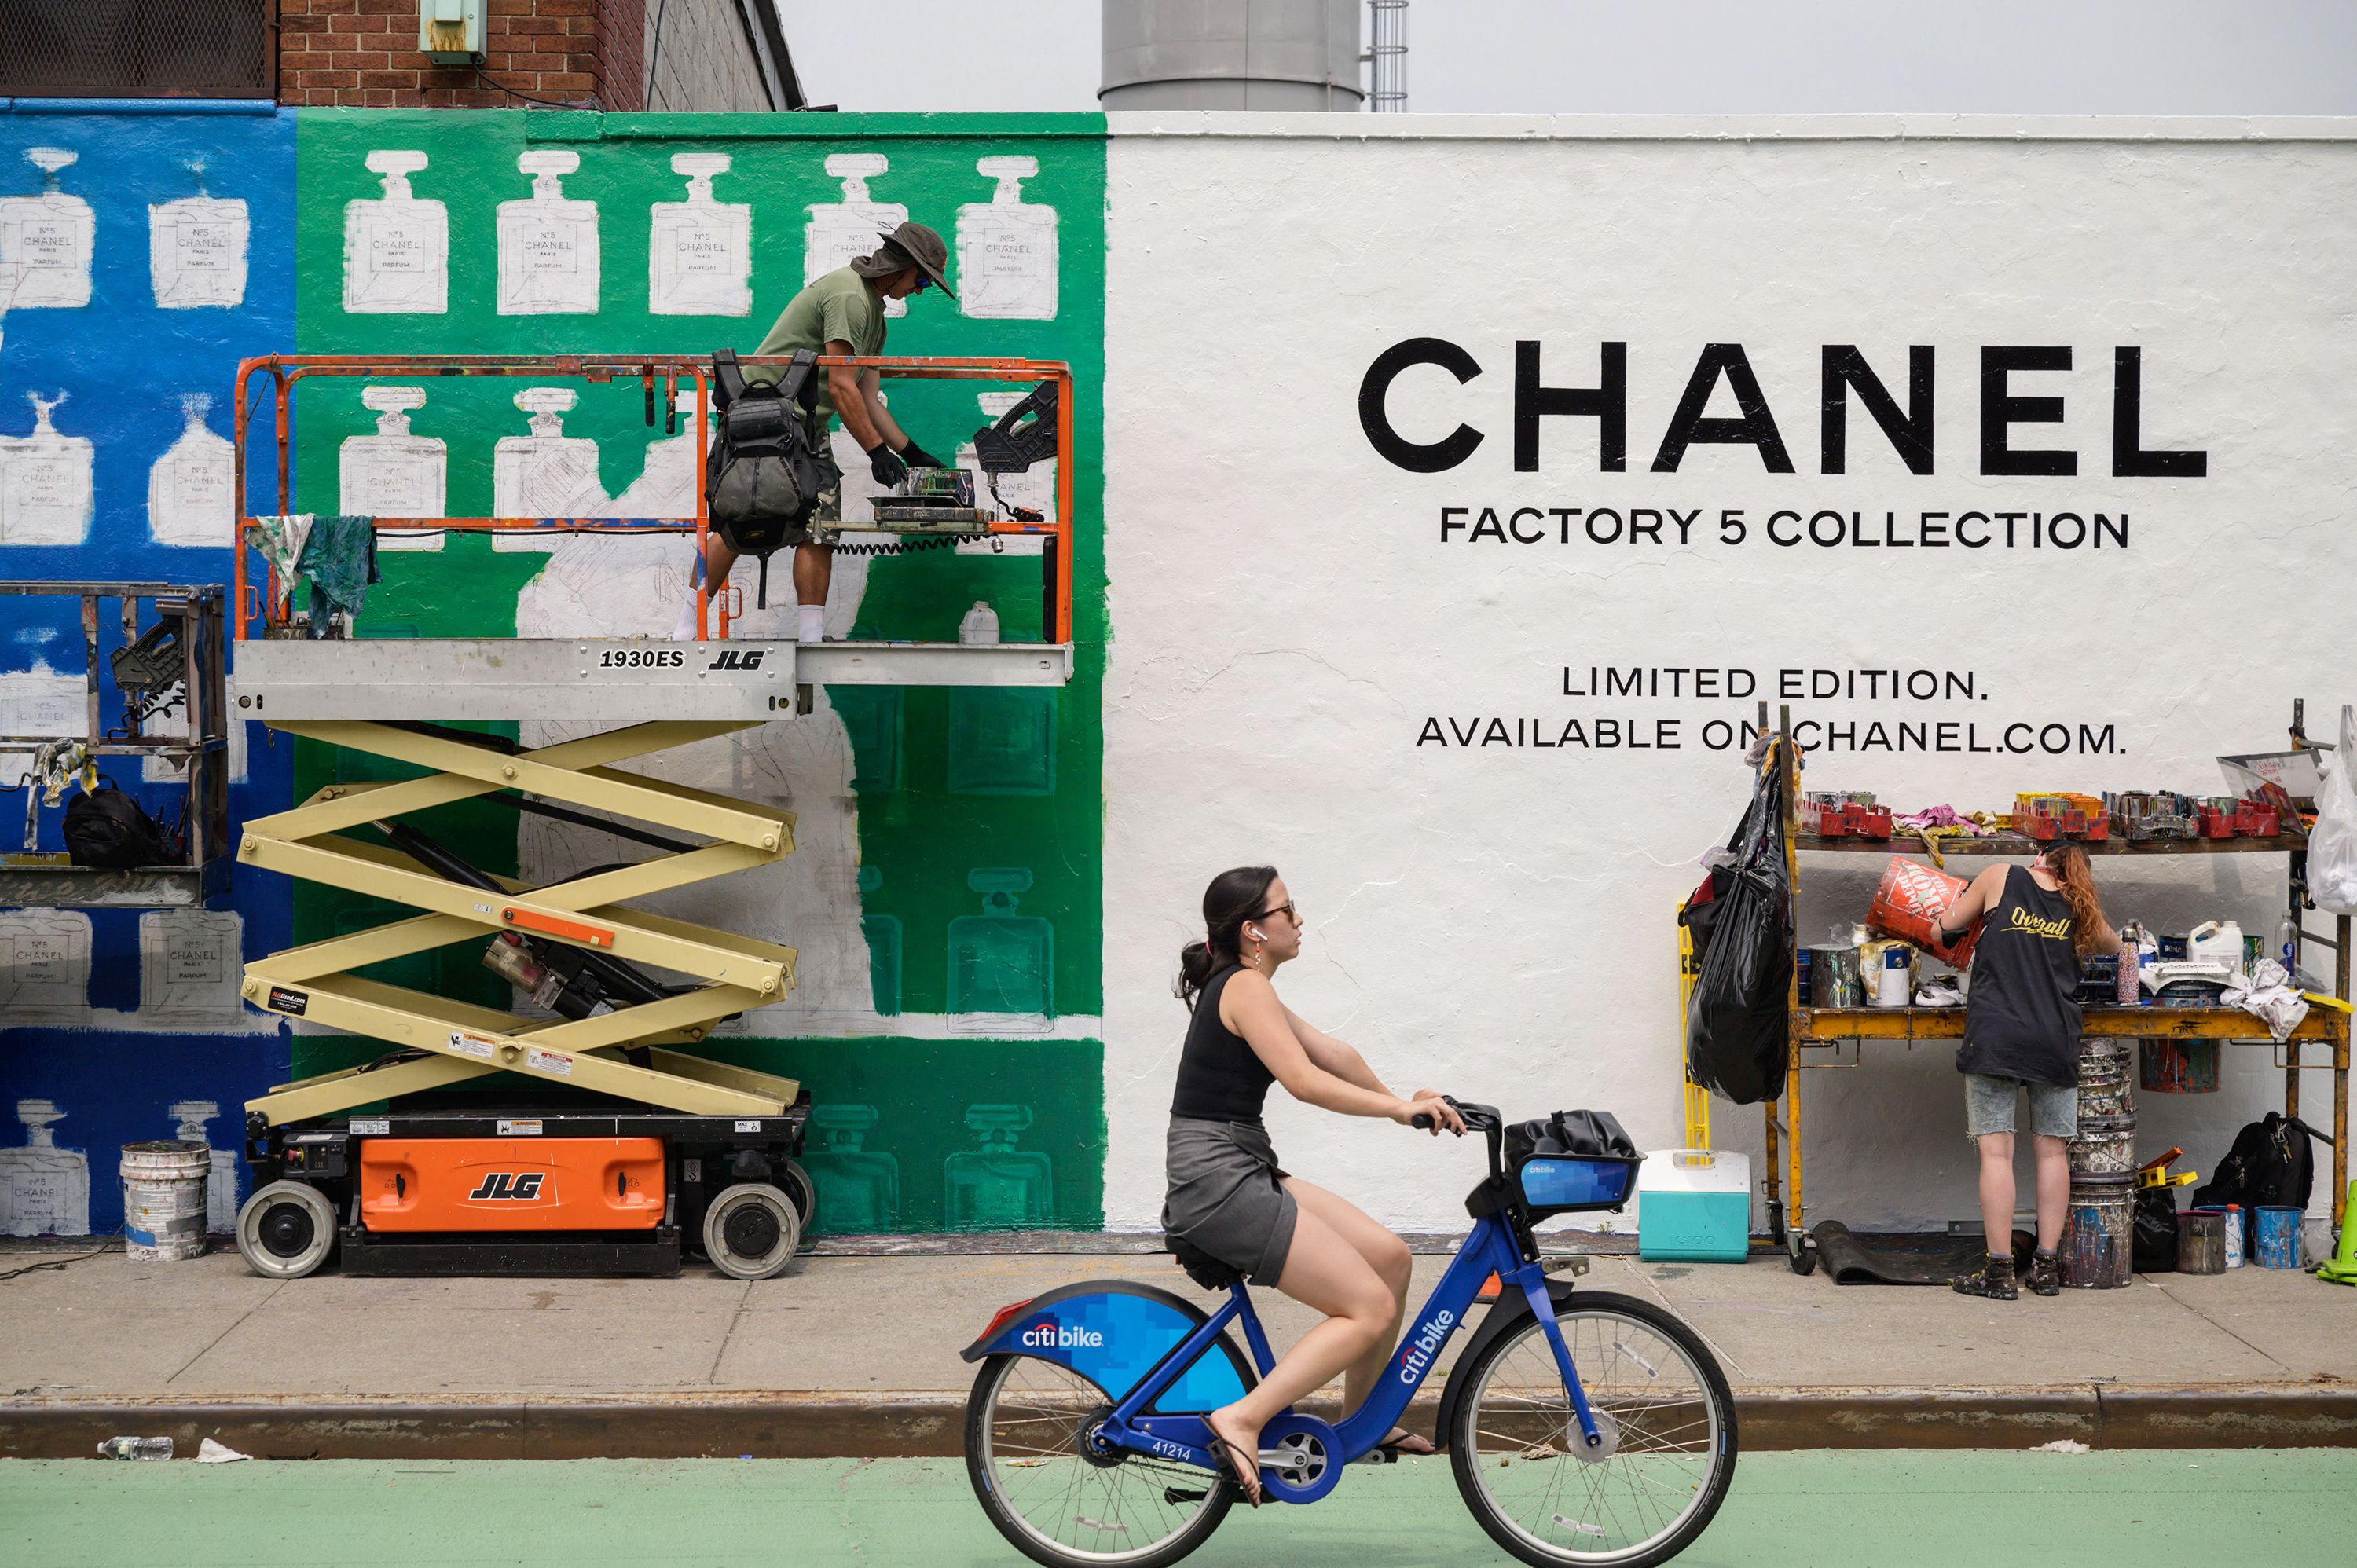 Chanel is opening a diner in Brooklyn with a menu of perfume